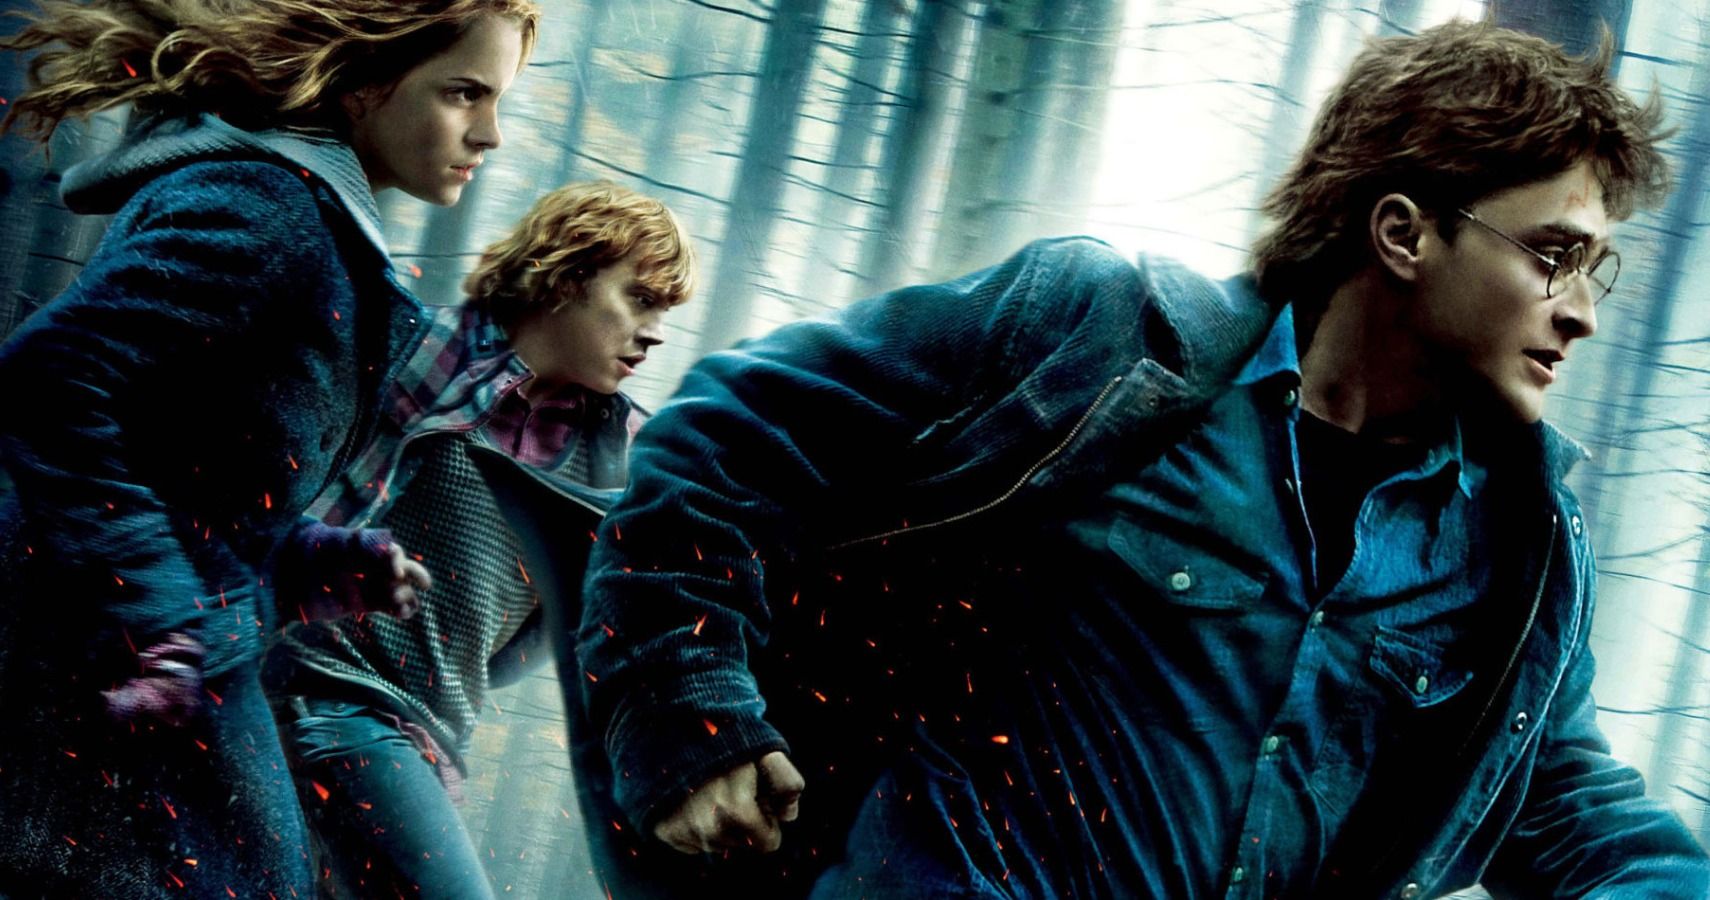 The 10 Best Quotes From Harry Potter & The Deathly Hallows Part 1